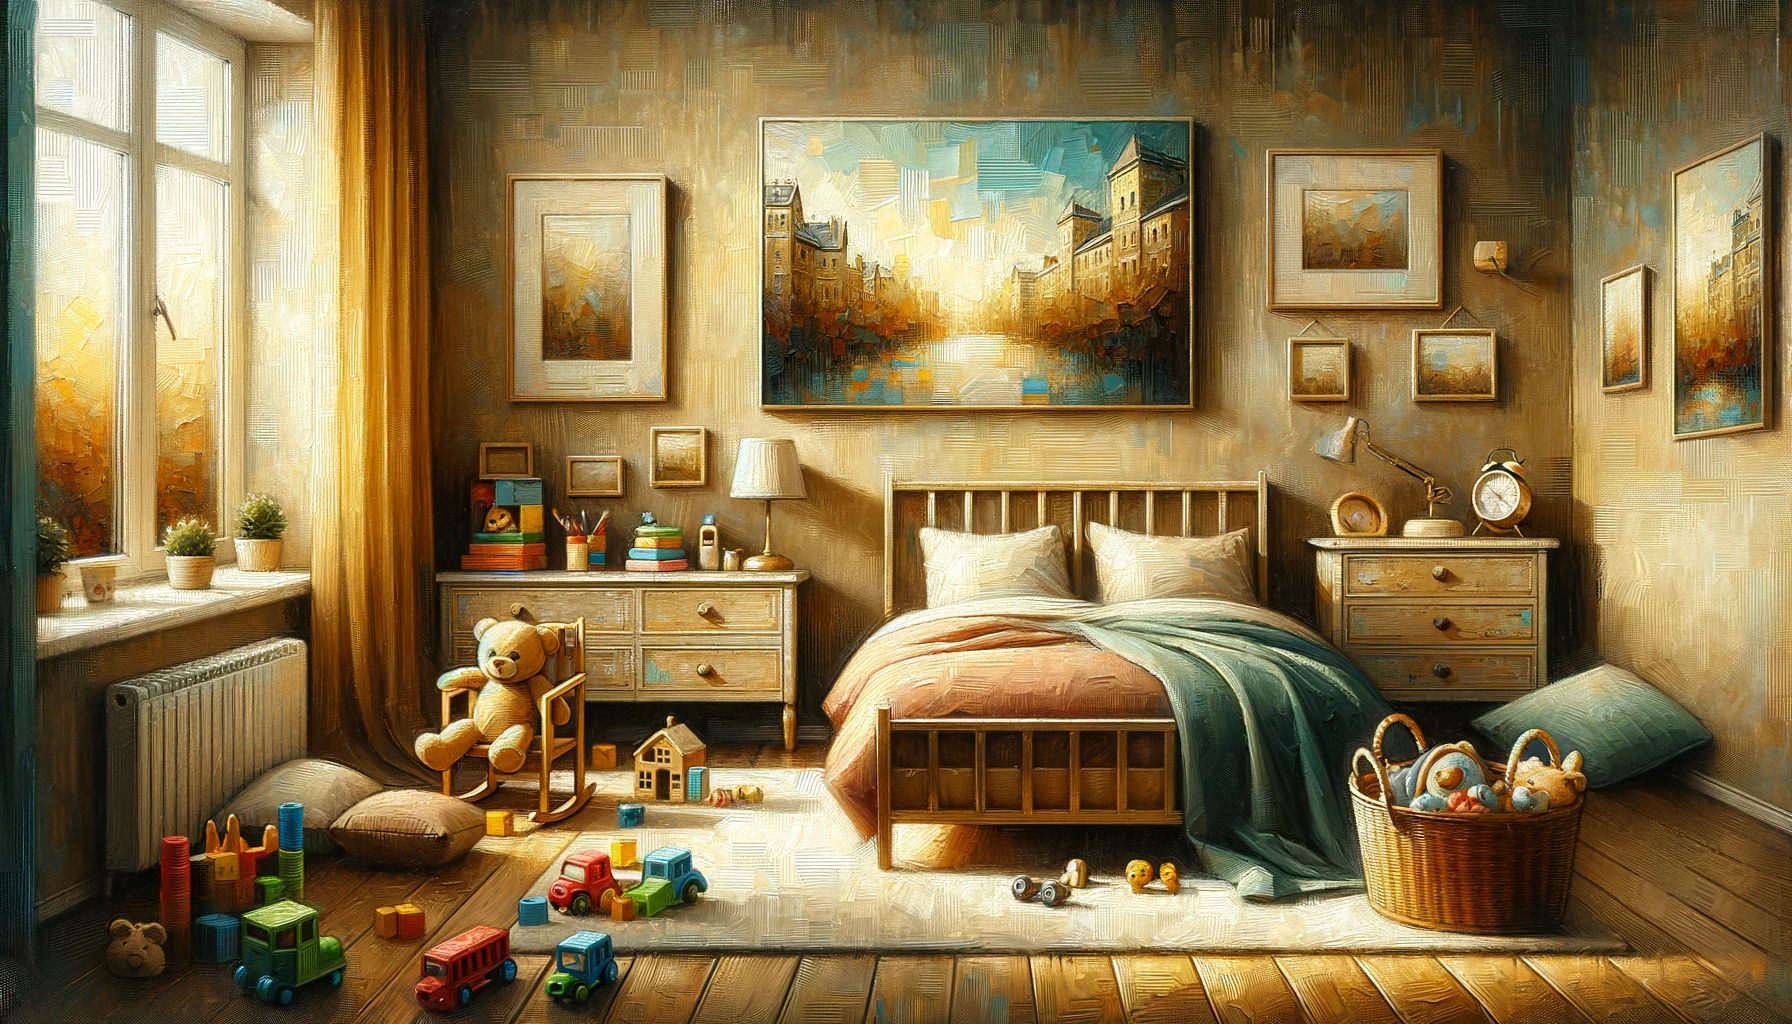 a painting of a child 's bedroom with a teddy bear on the bed